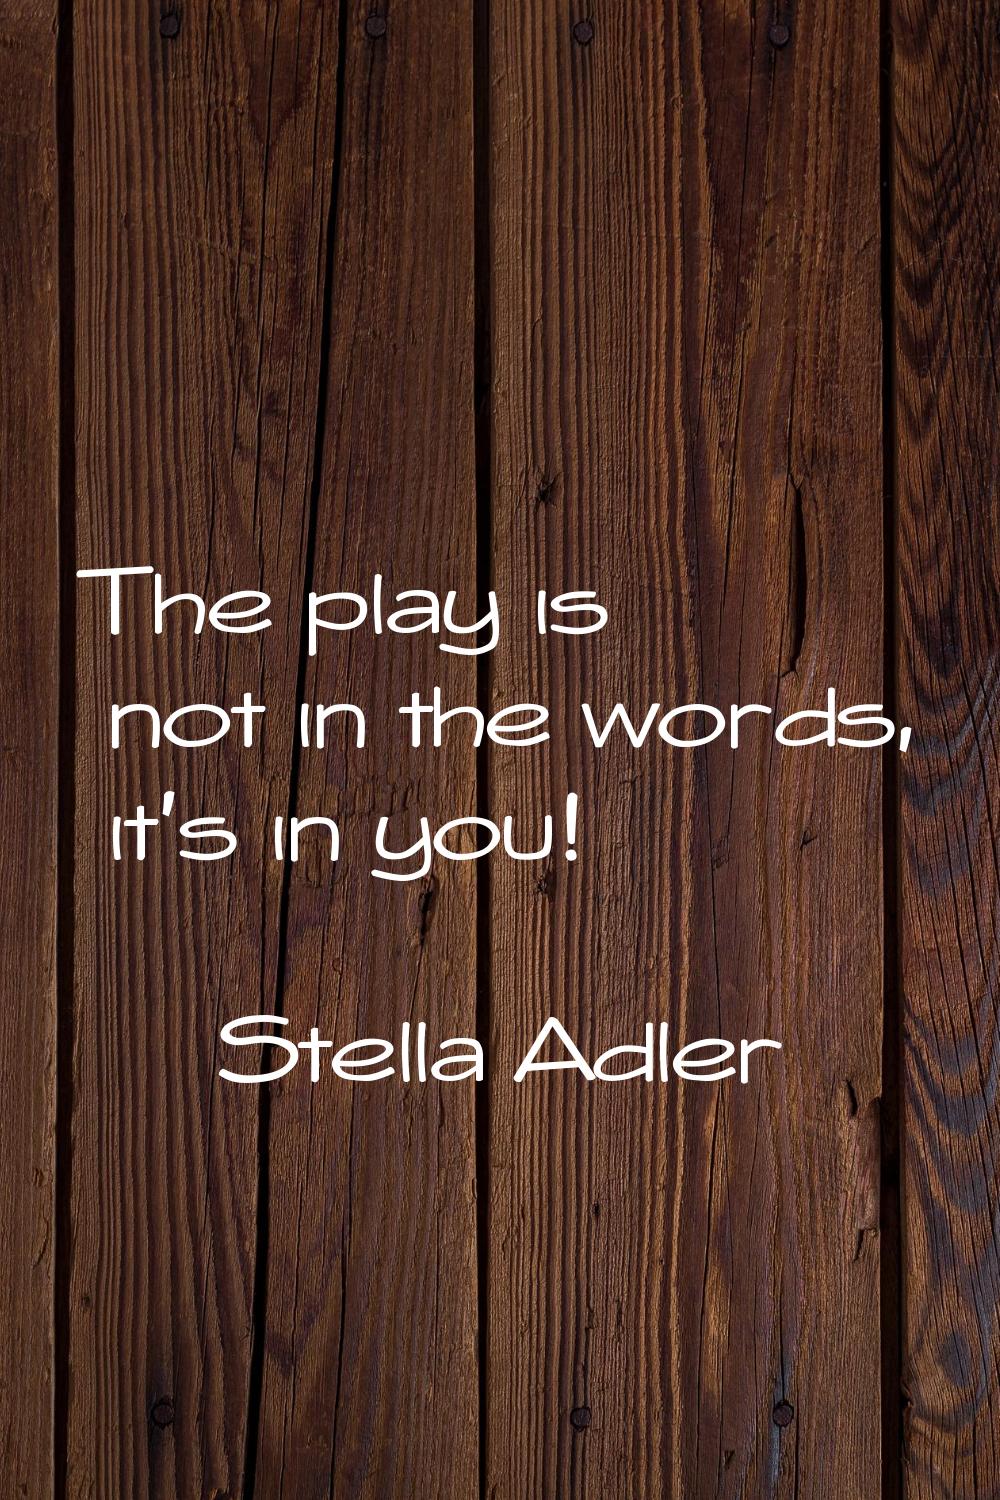 The play is not in the words, it's in you!